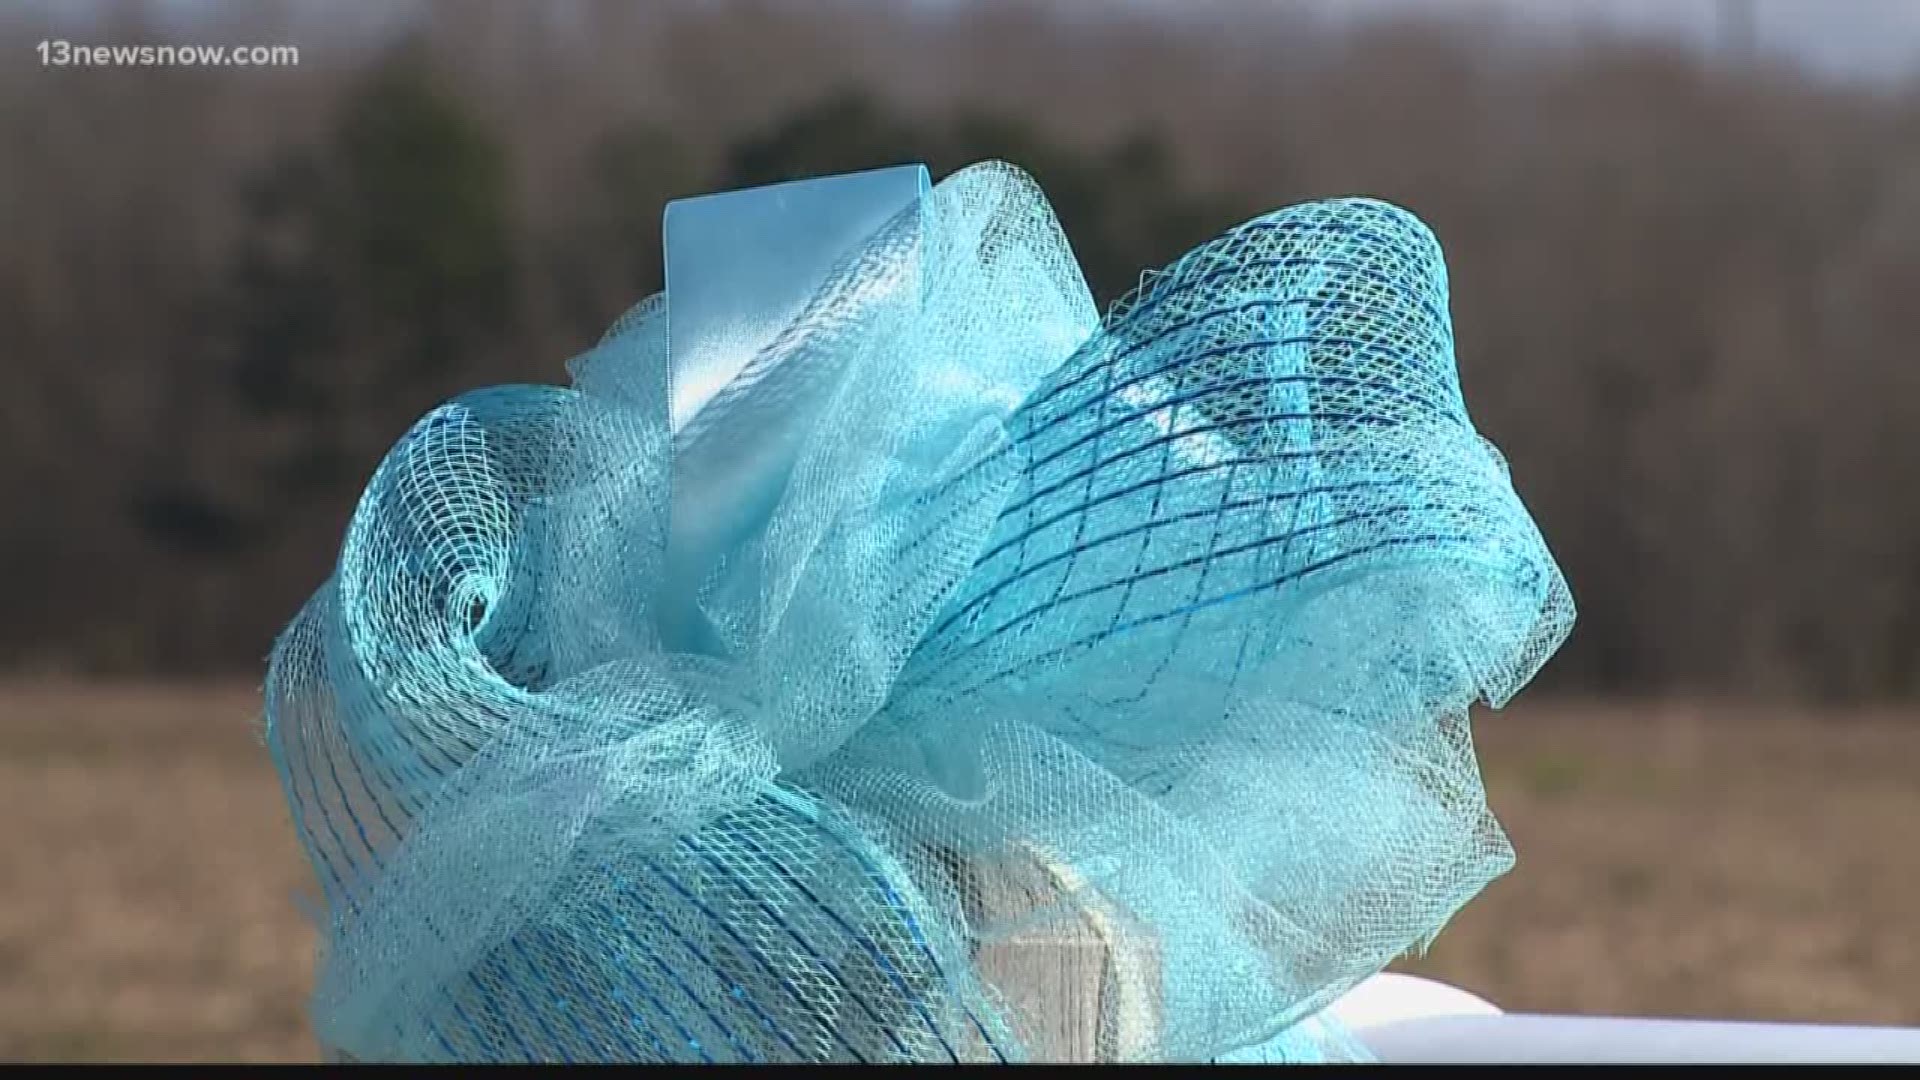 A Virginia Beach community is mourning the loss of a 4-year-old-boy and showing their support with blue ribbons.